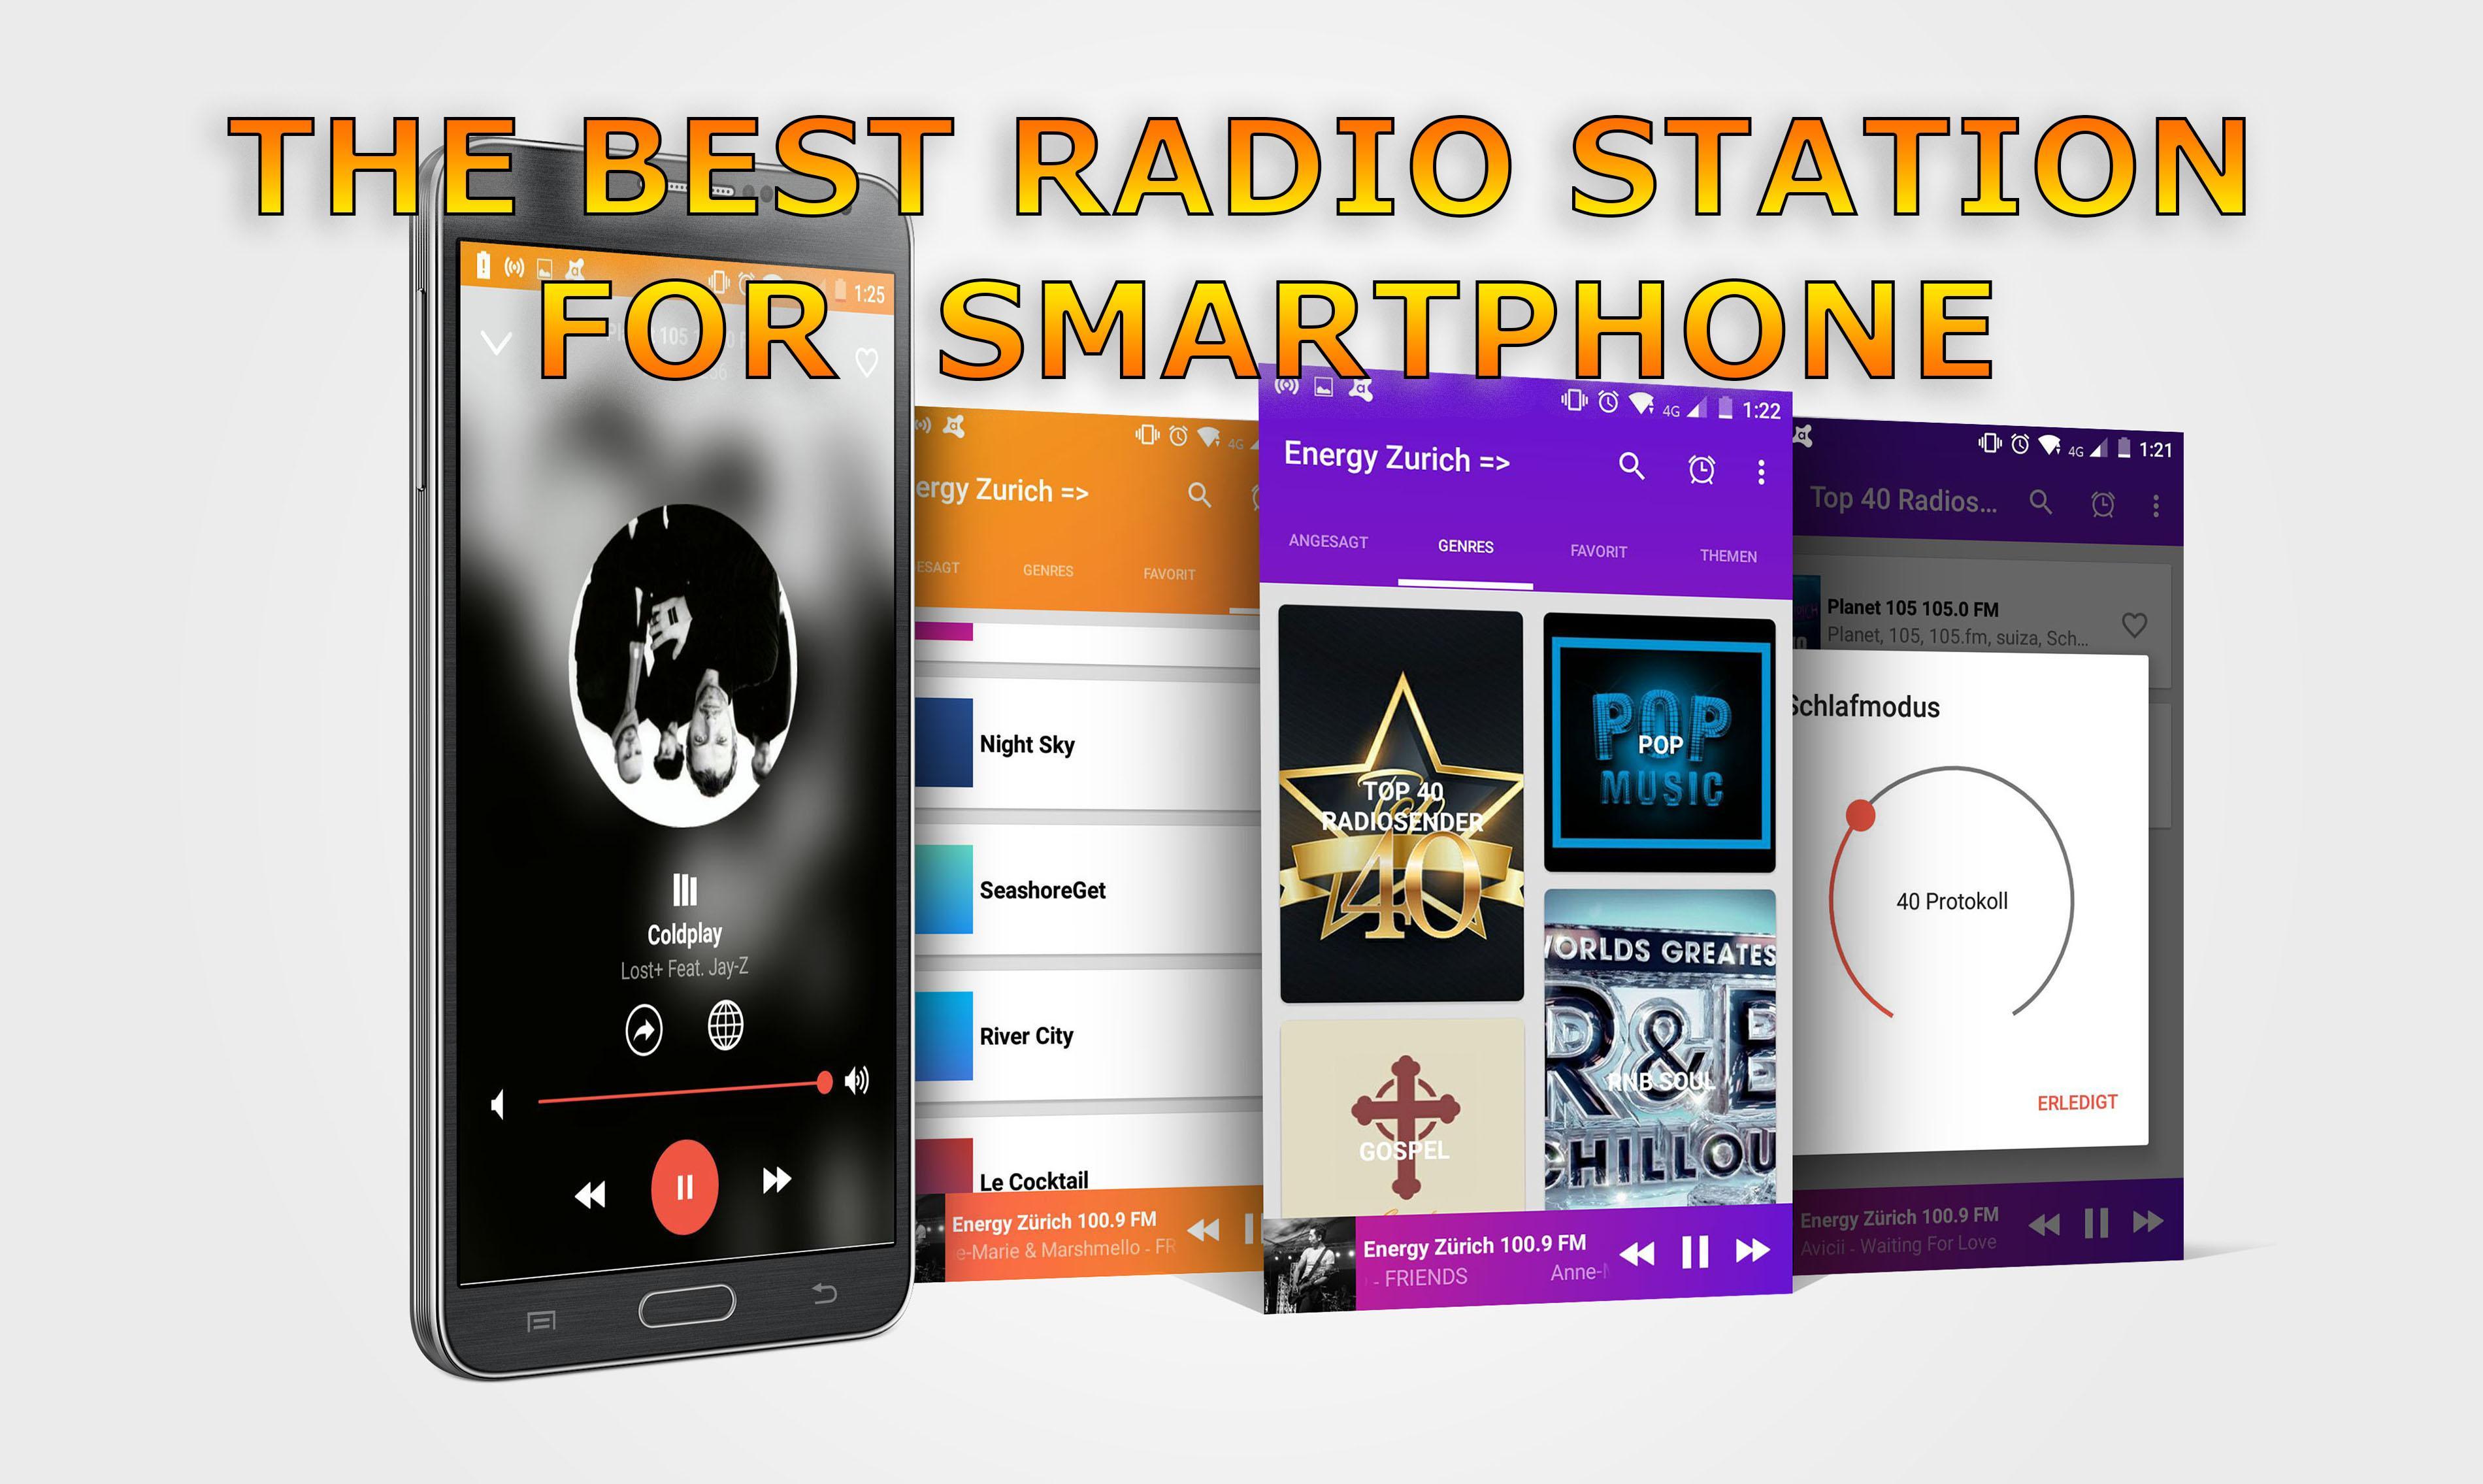 NRK P3 93.5 FM Oslo for Android - APK Download